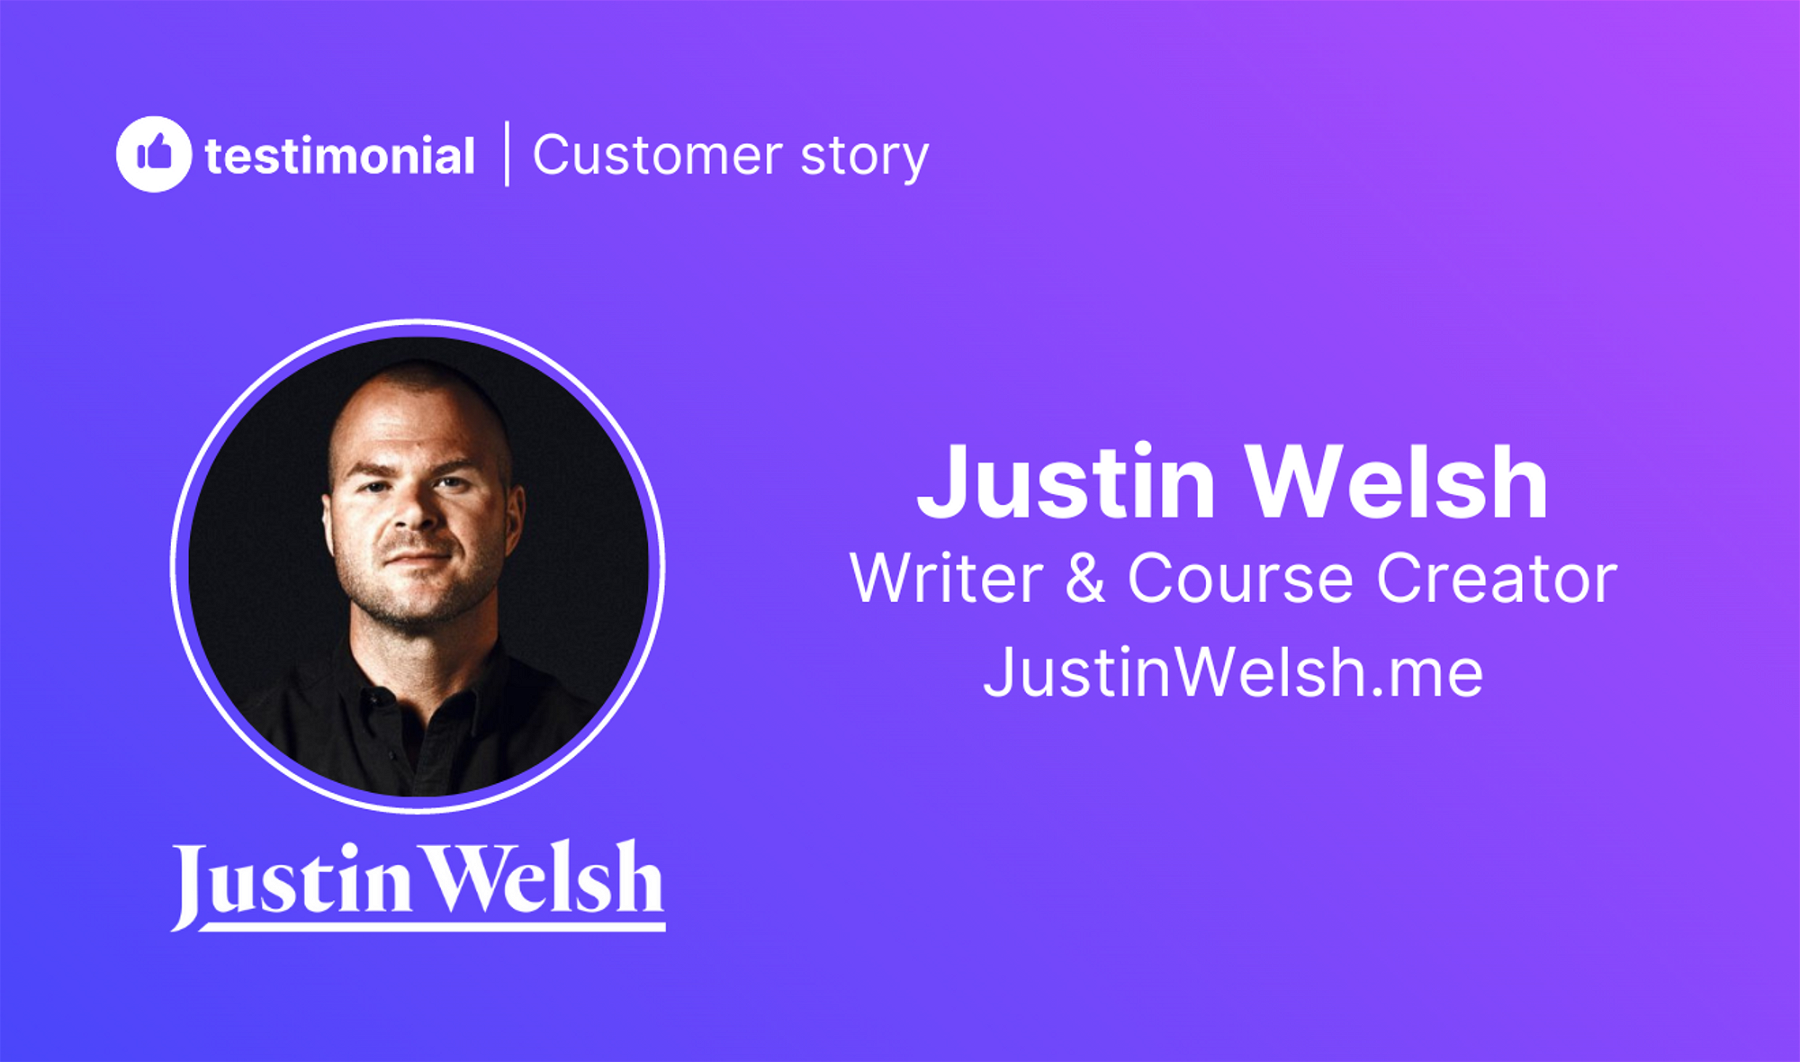 How Justin Welsh uses Testimonials to grow his course business